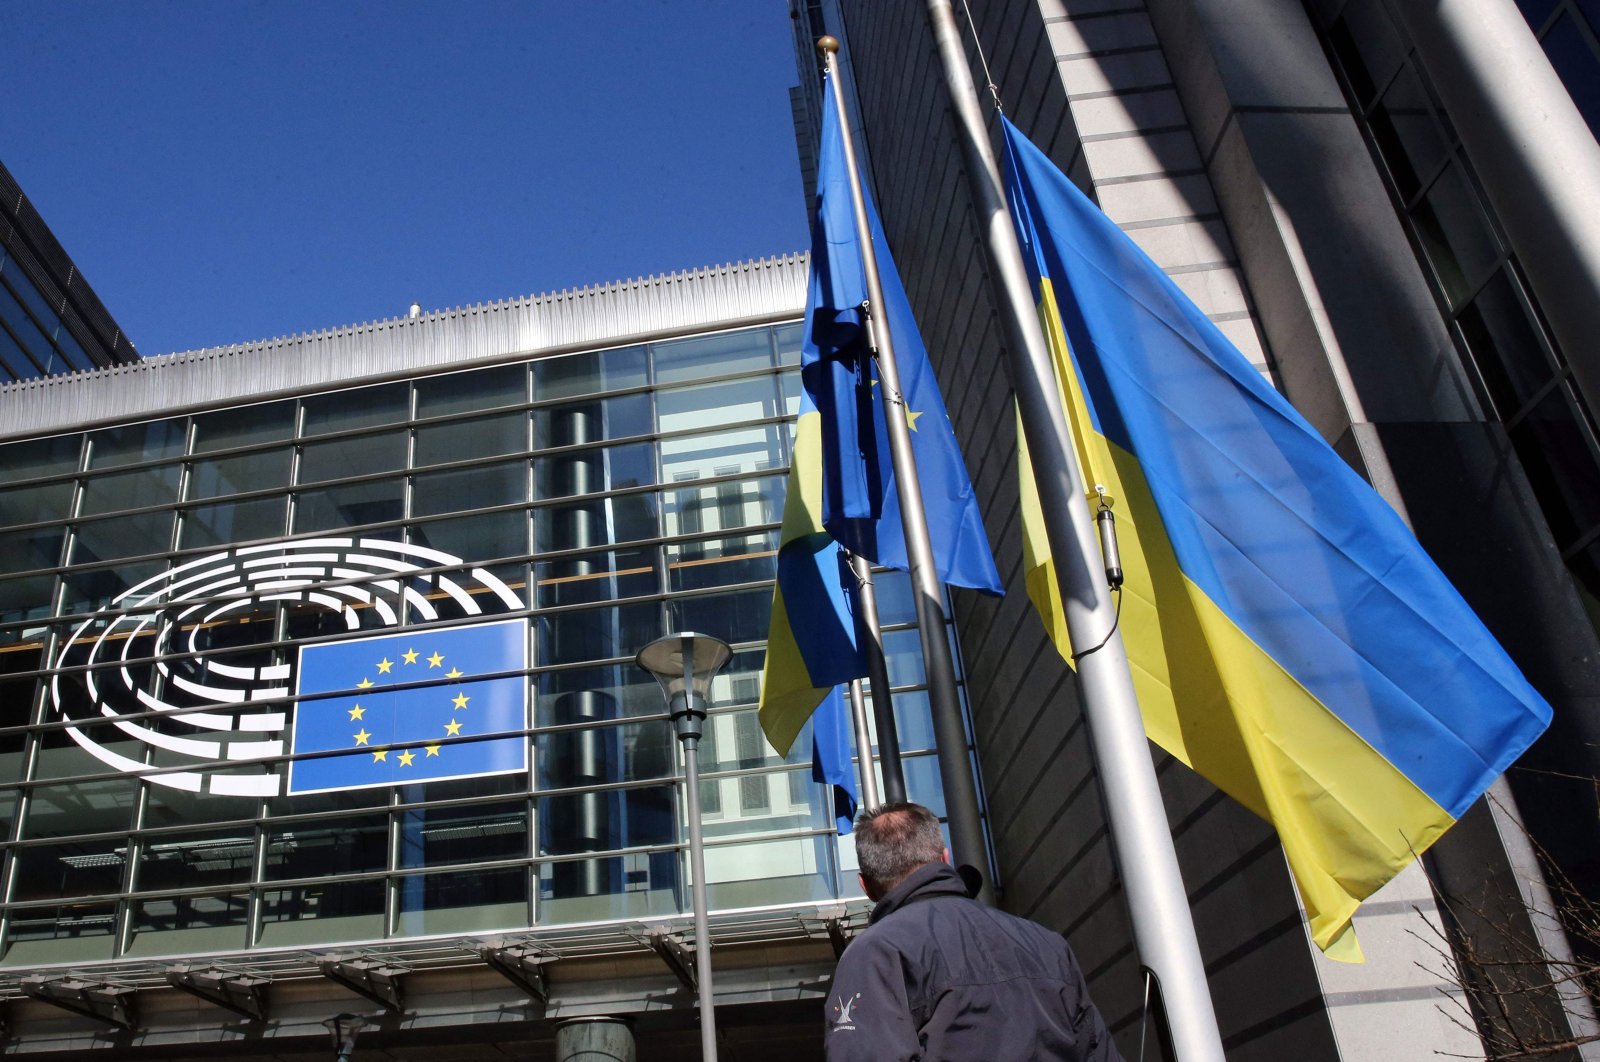 The Ukrainian flag is hoisted alongside the European Union flag outside the European Parliament headquarters to show their support for Ukrania after the nation was invaded on Feb. 24 by Russia, in Brussels, Belgium, Feb. 28, 2022. (AFP Photo)